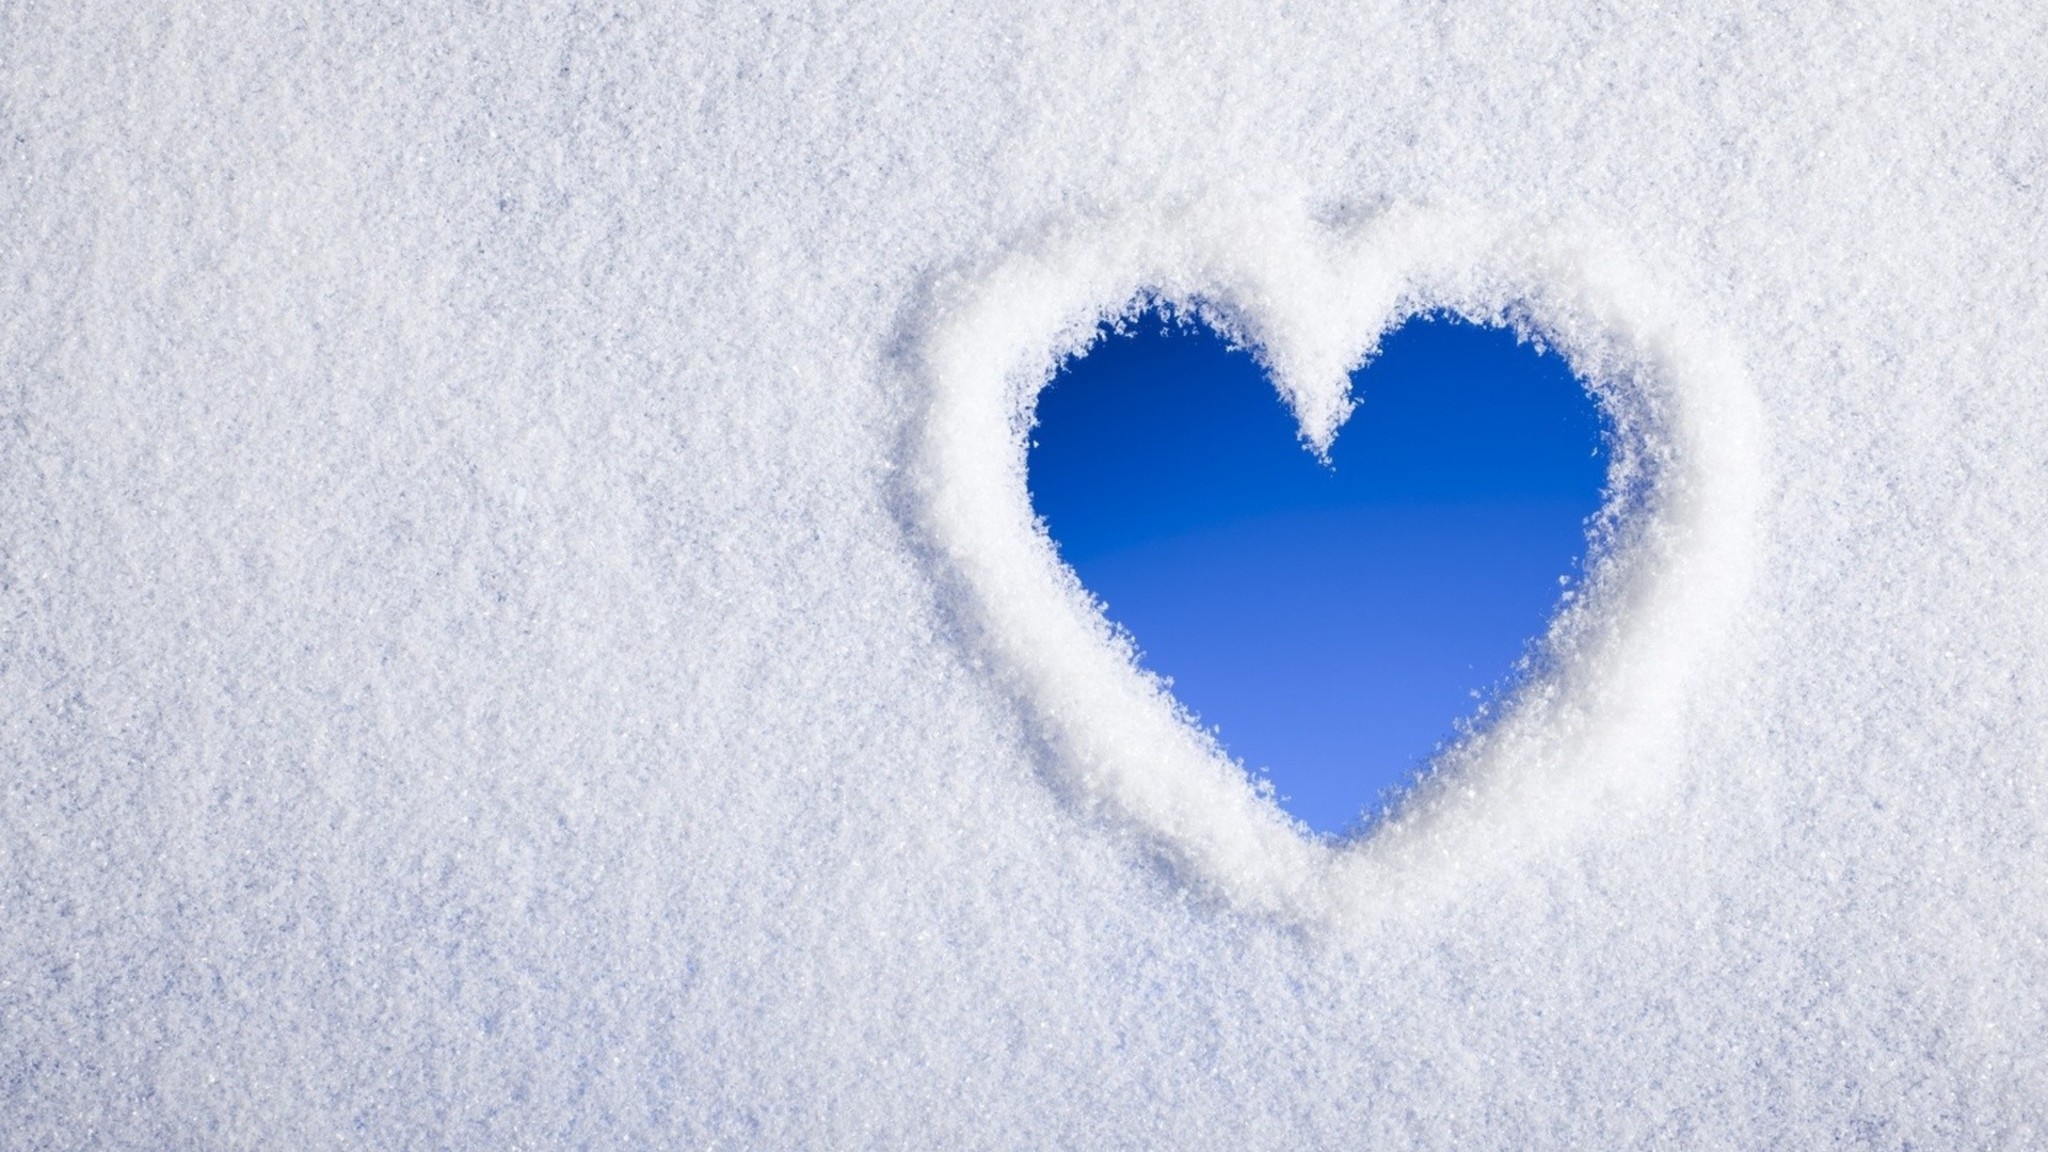 2048x1152 Snow Heart 2048x1152 Resolution HD 4k Wallpapers, Images ...